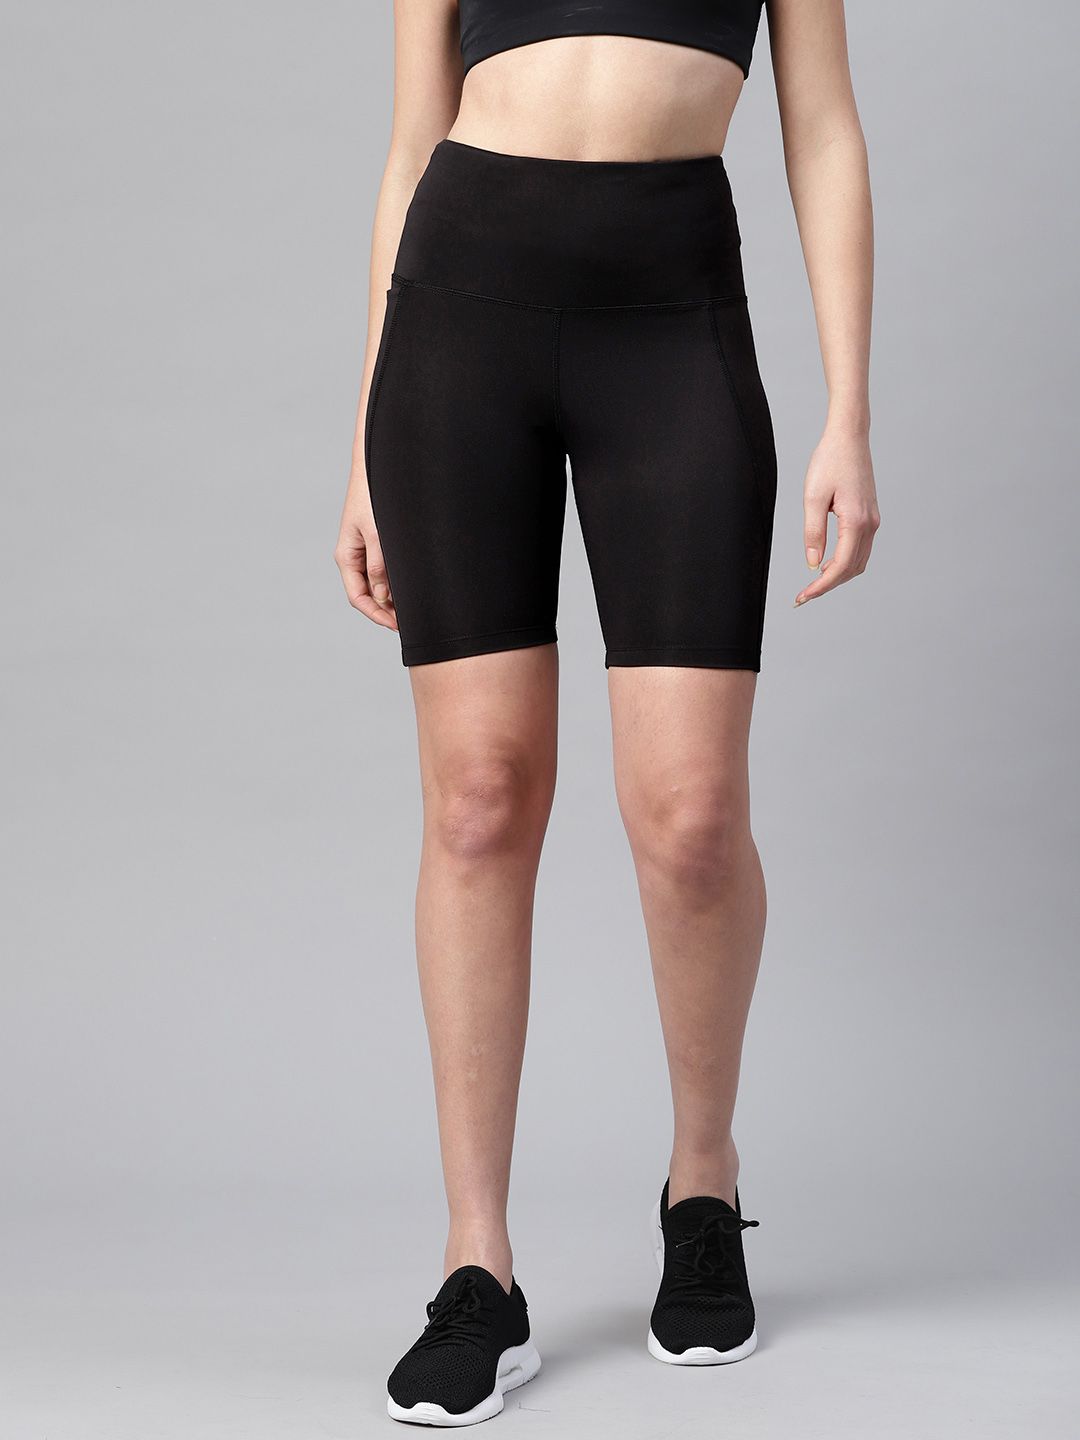 PICOT Women Black Skinny Fit High-Rise Cycling Sports Shorts Price in India